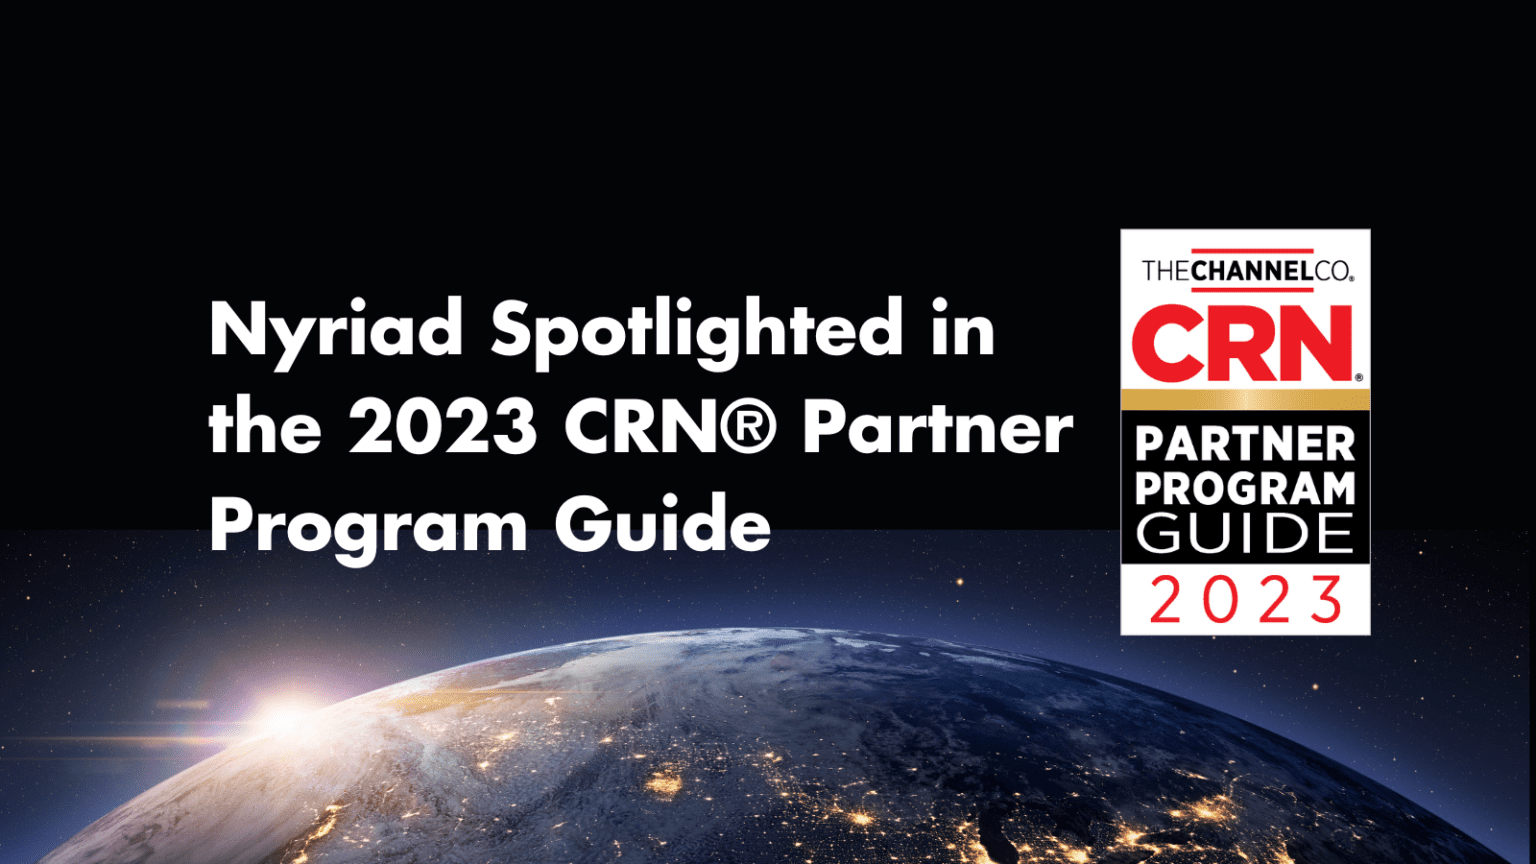 Nyriad Spotlighted in the 2023 CRN® Partner Program Guide